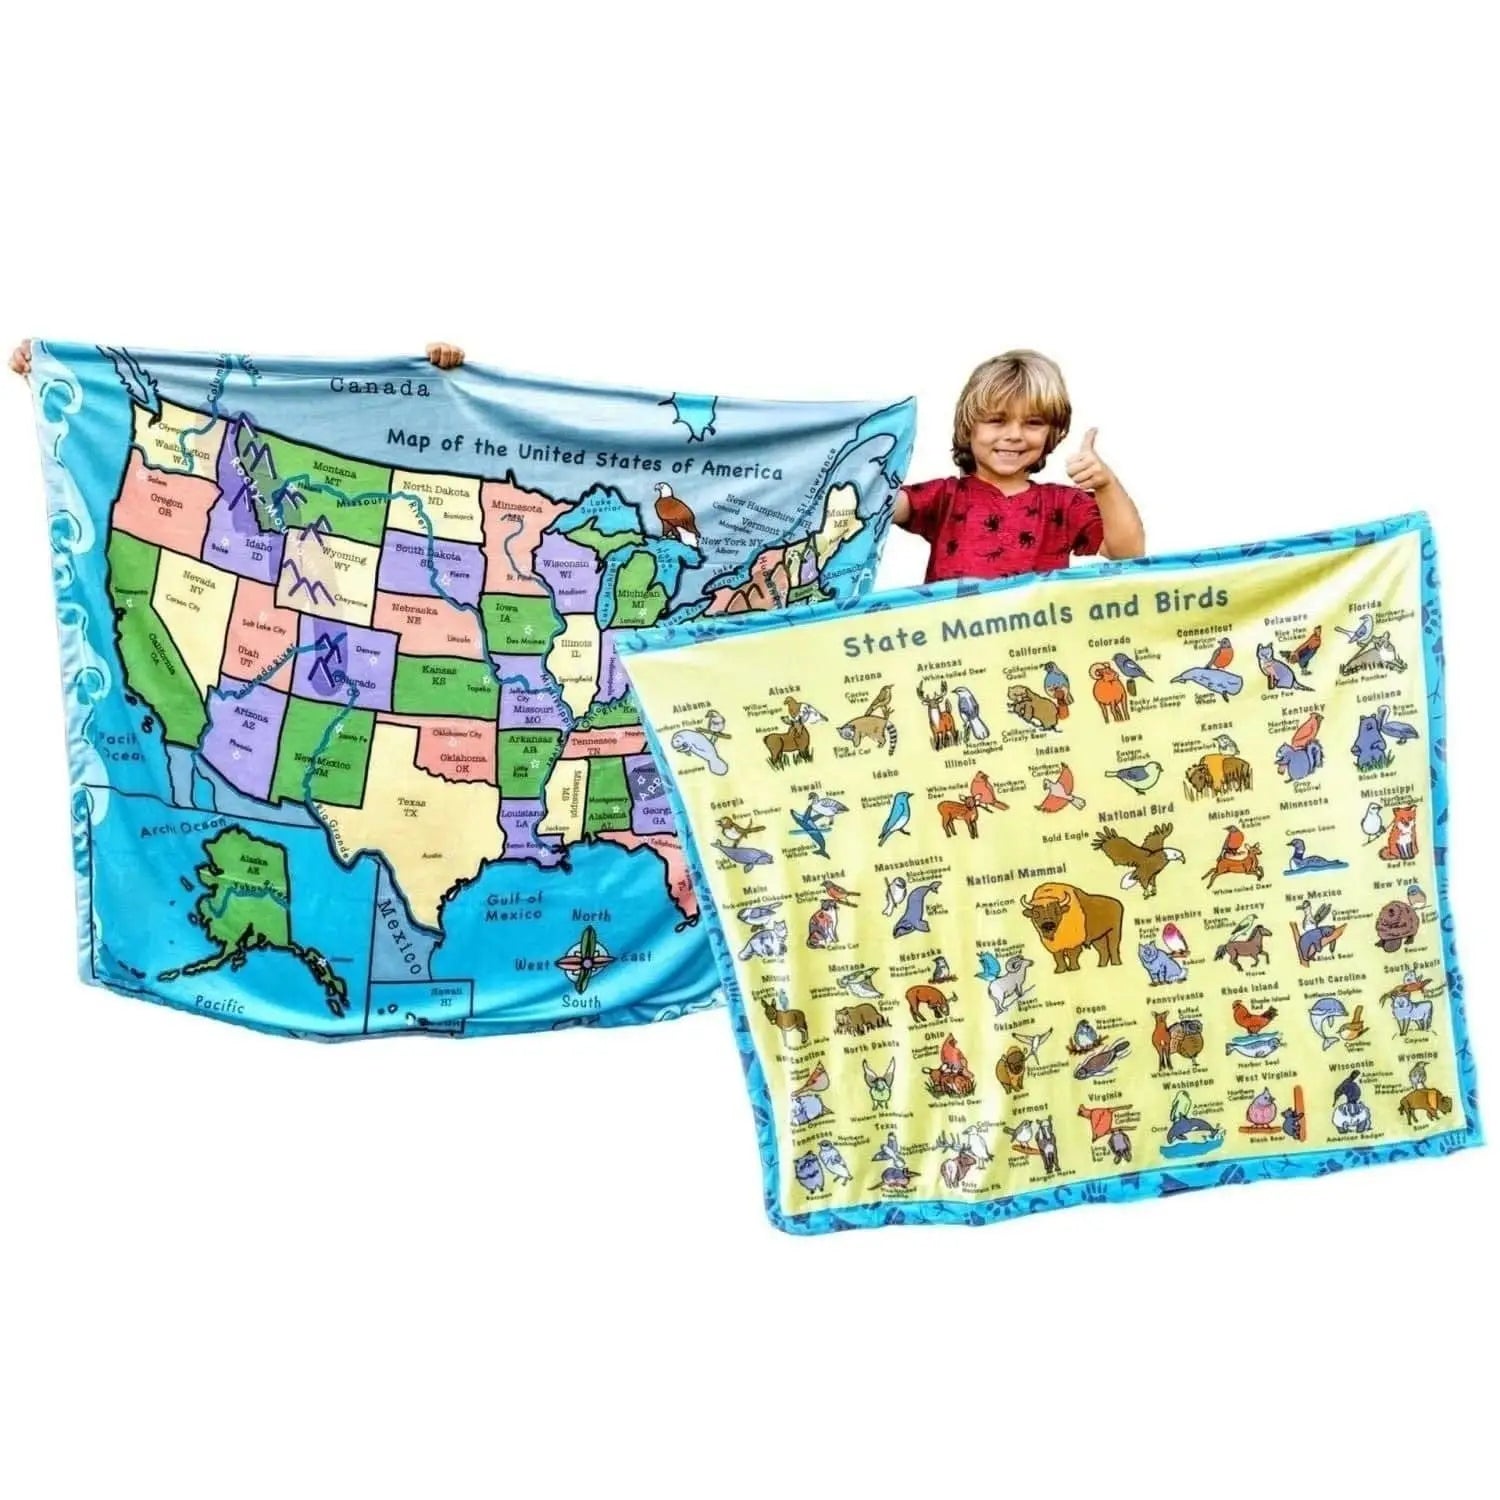 Birdy Boutique Children's Learning Blanket US Map on one side, State mammals and birds on other side